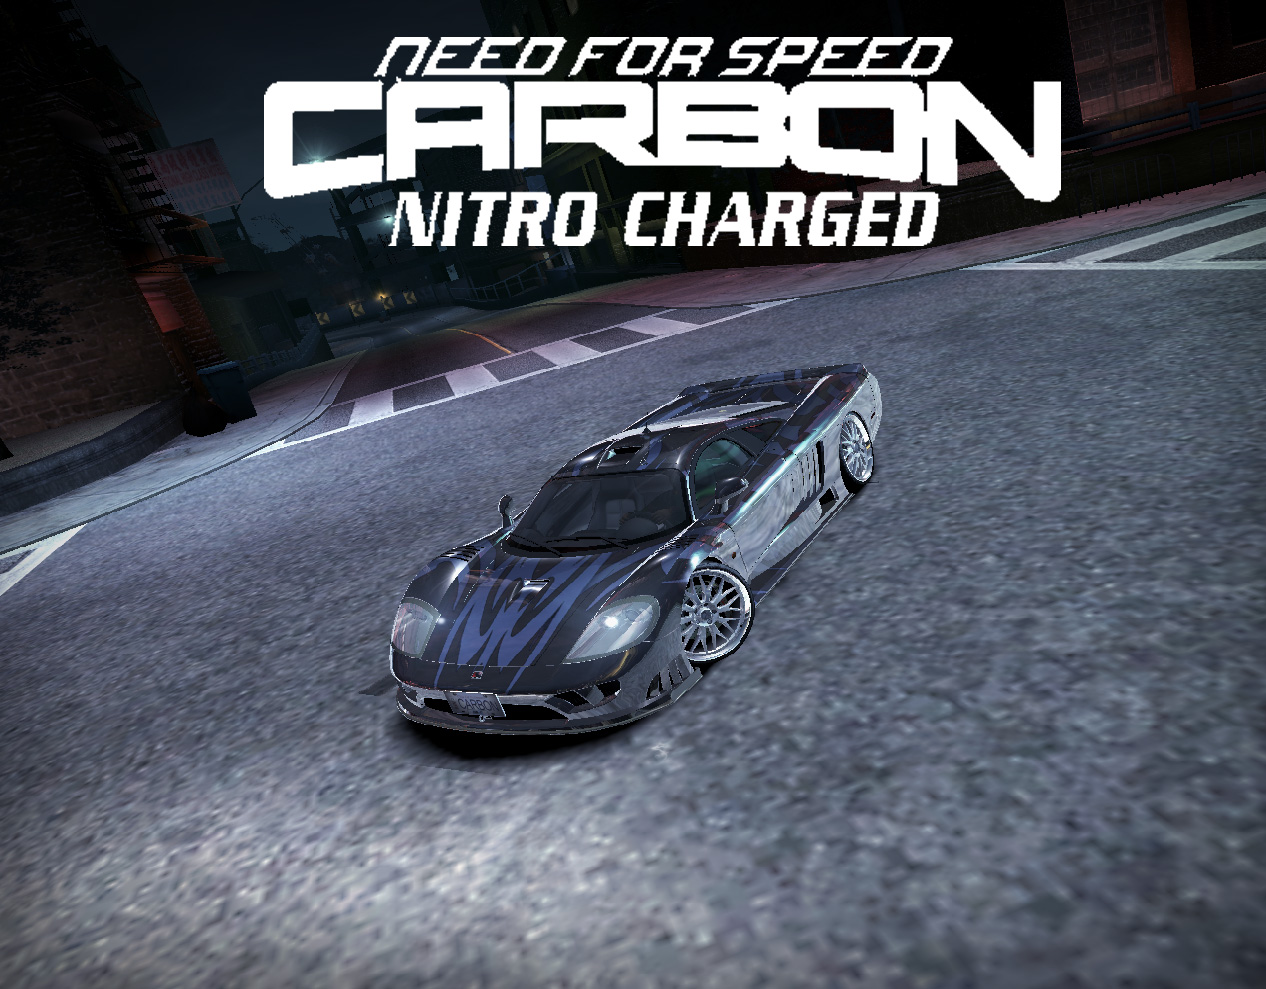 Need for Speed Carbon Nitro Charged wallpaper 4 by Rainbow-Dash-Rockz